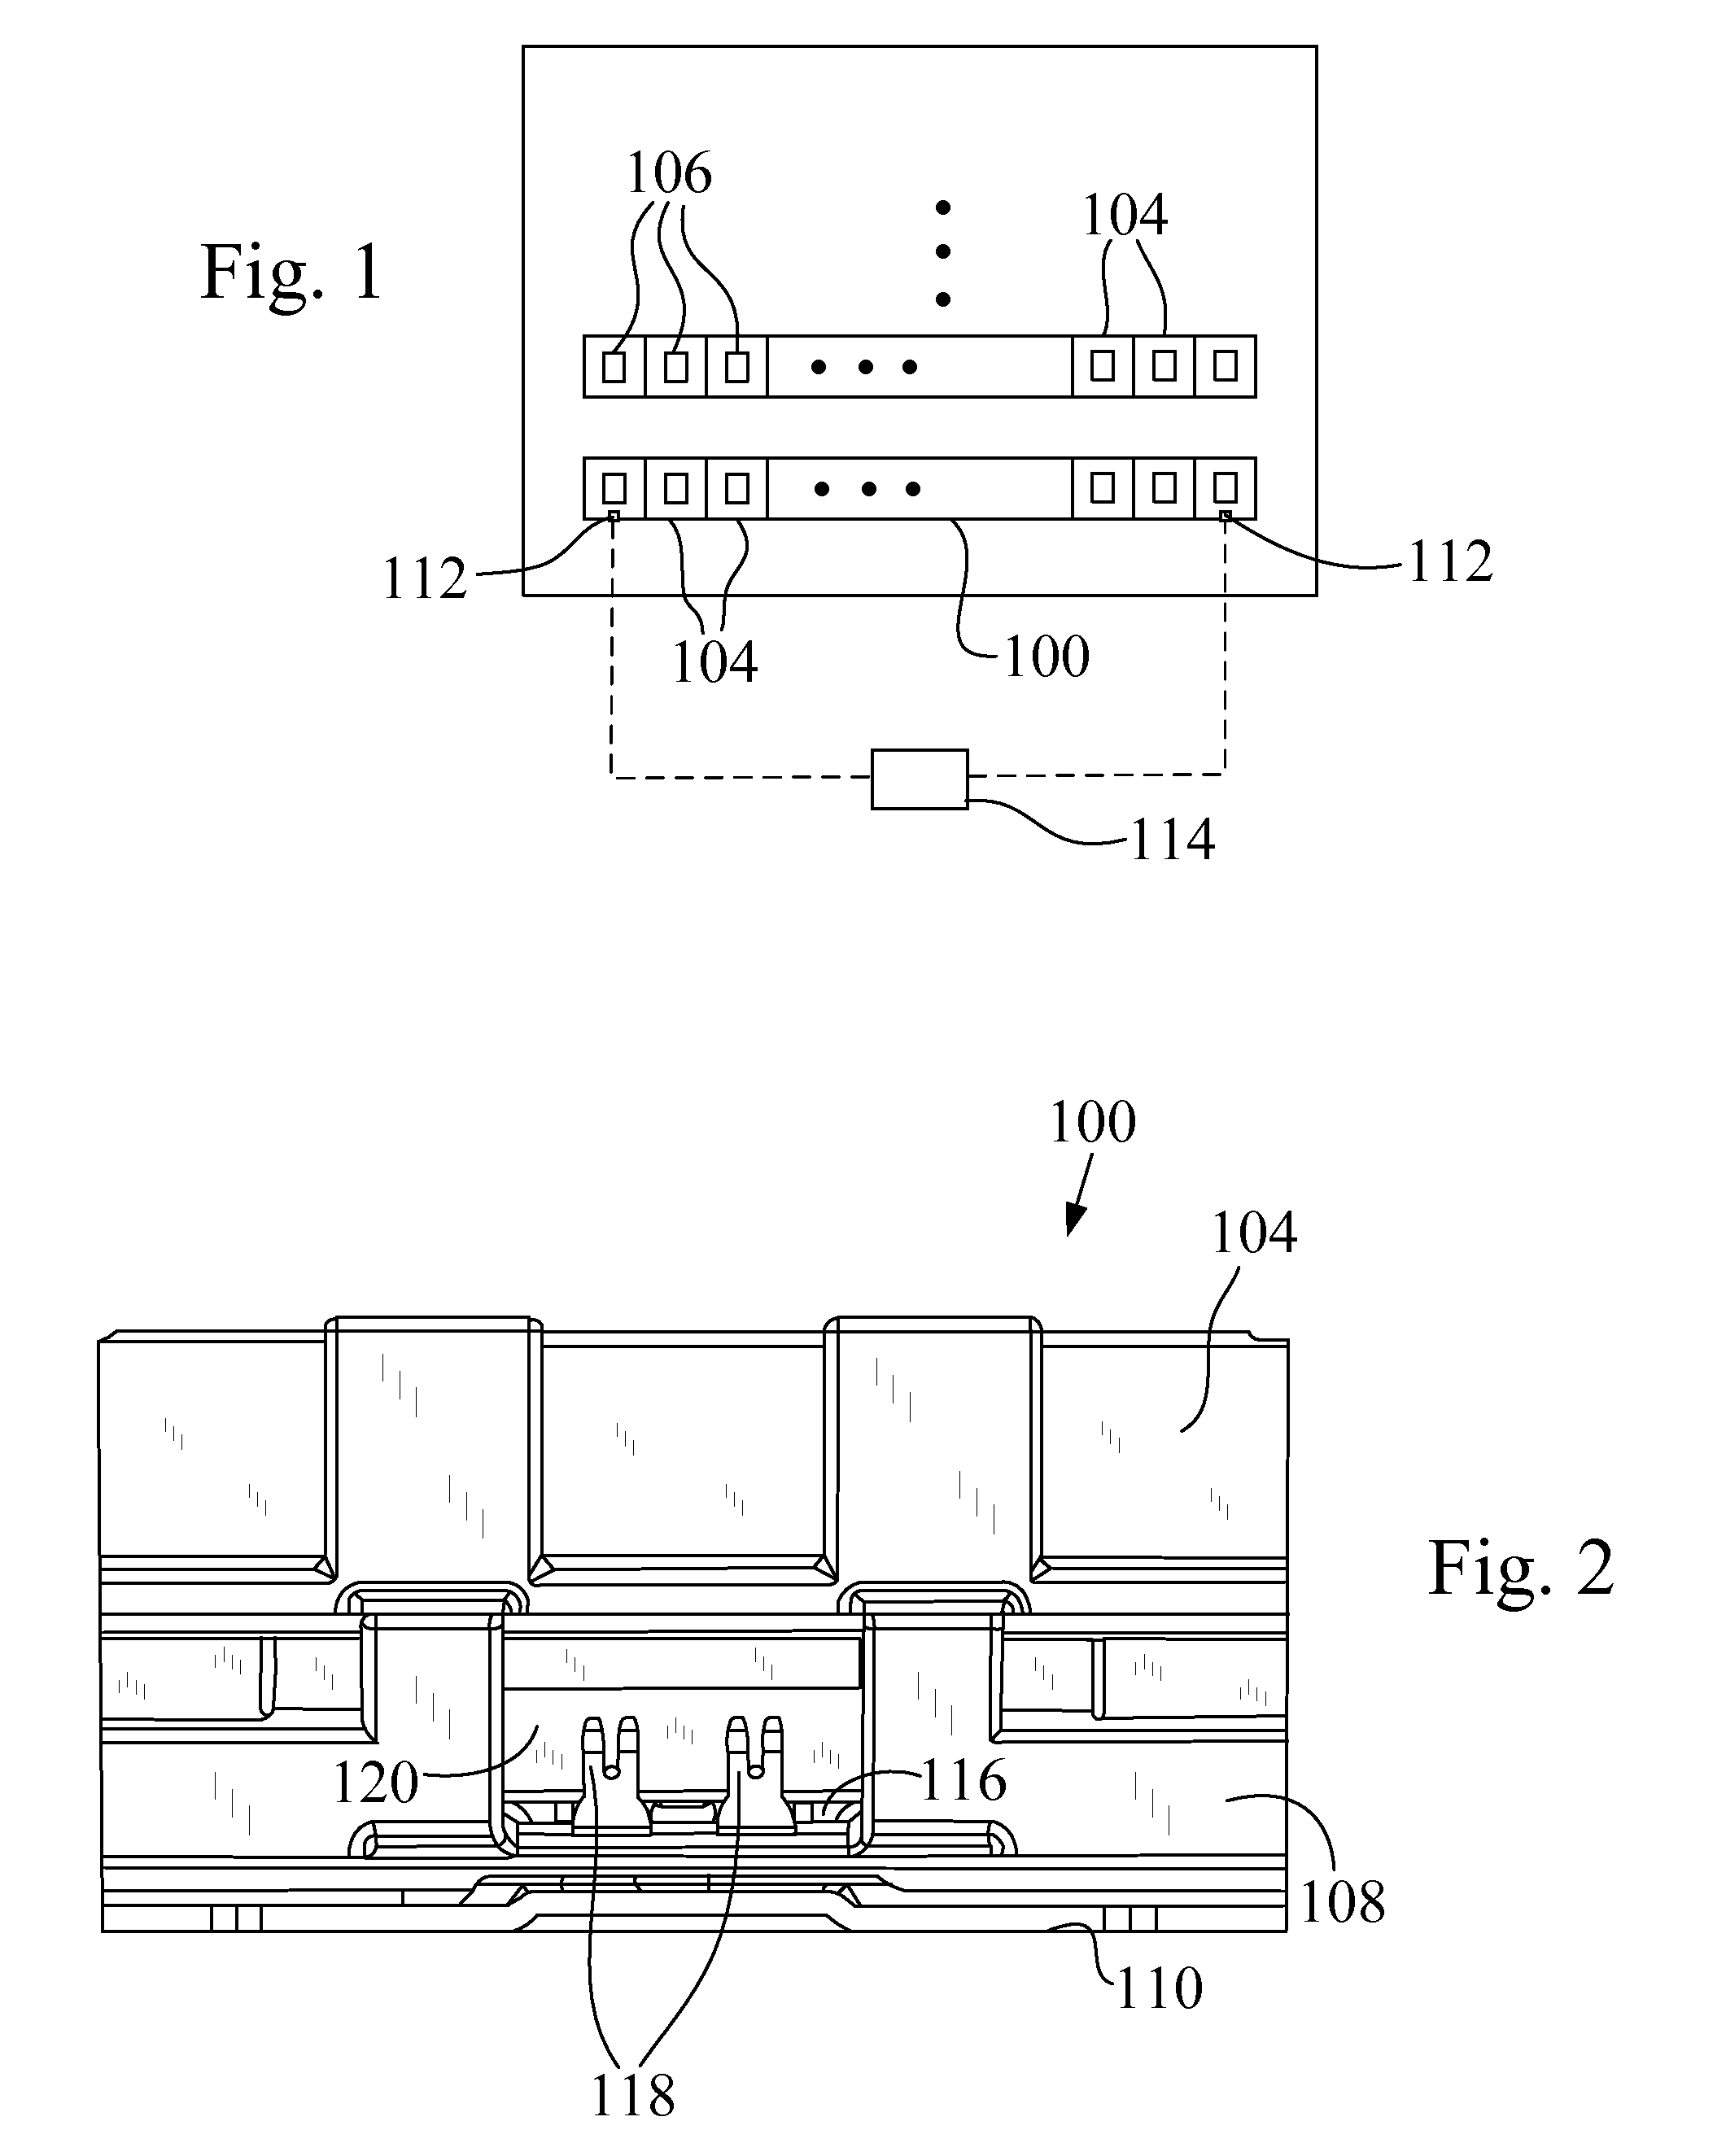 Temperature sensor mounting arrangement for a battery frame assembly